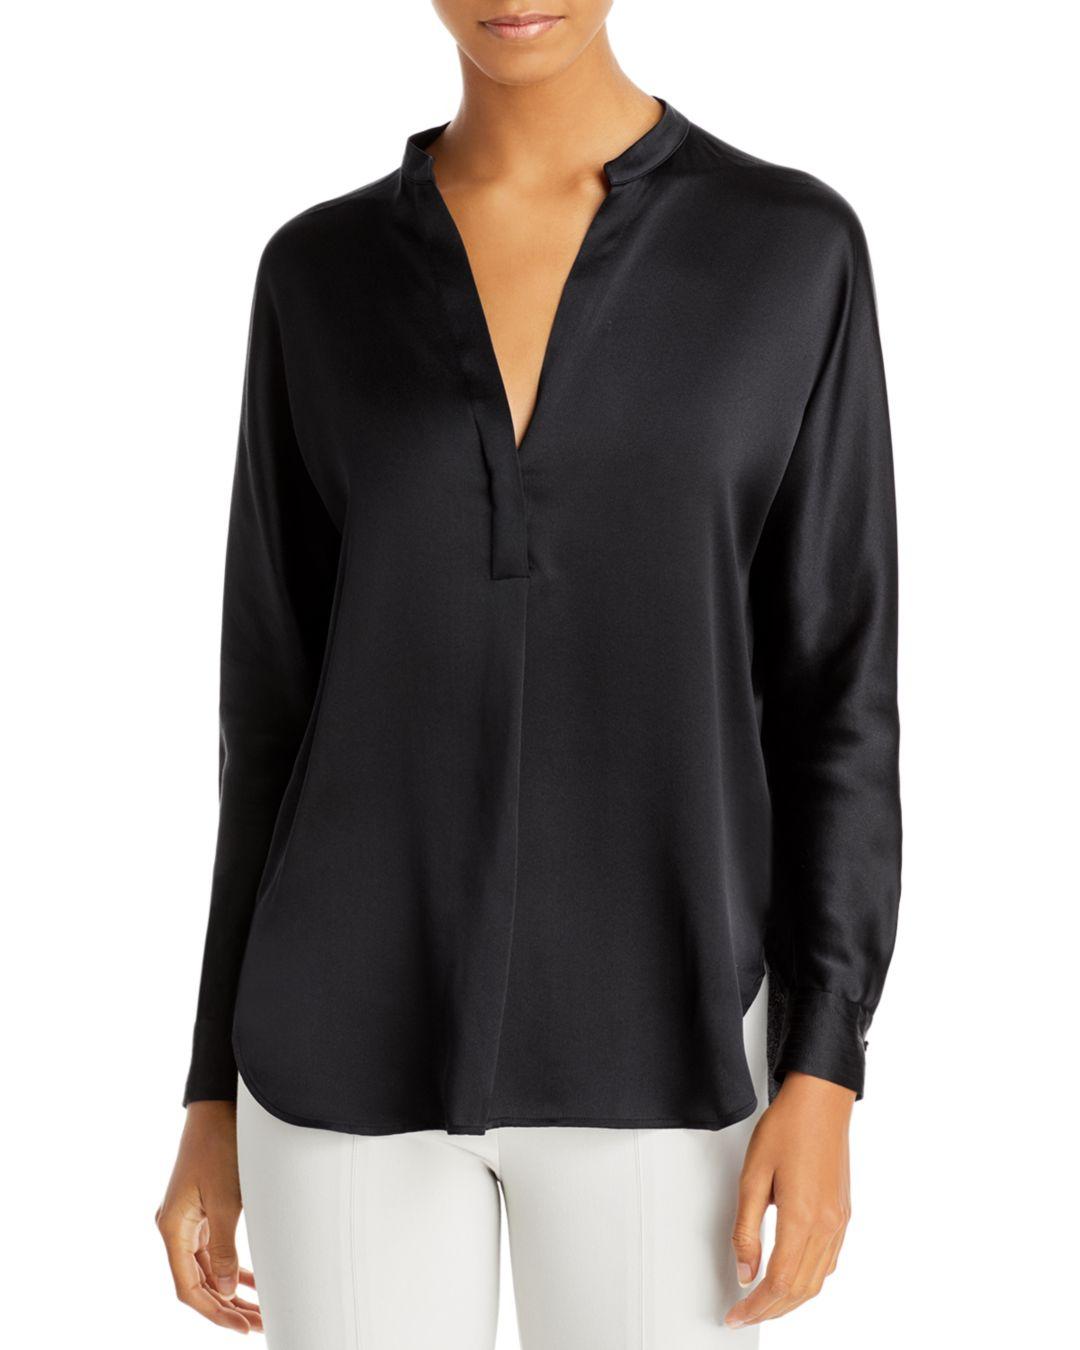 Vince Band Collar Silk Blouse in Black - Lyst